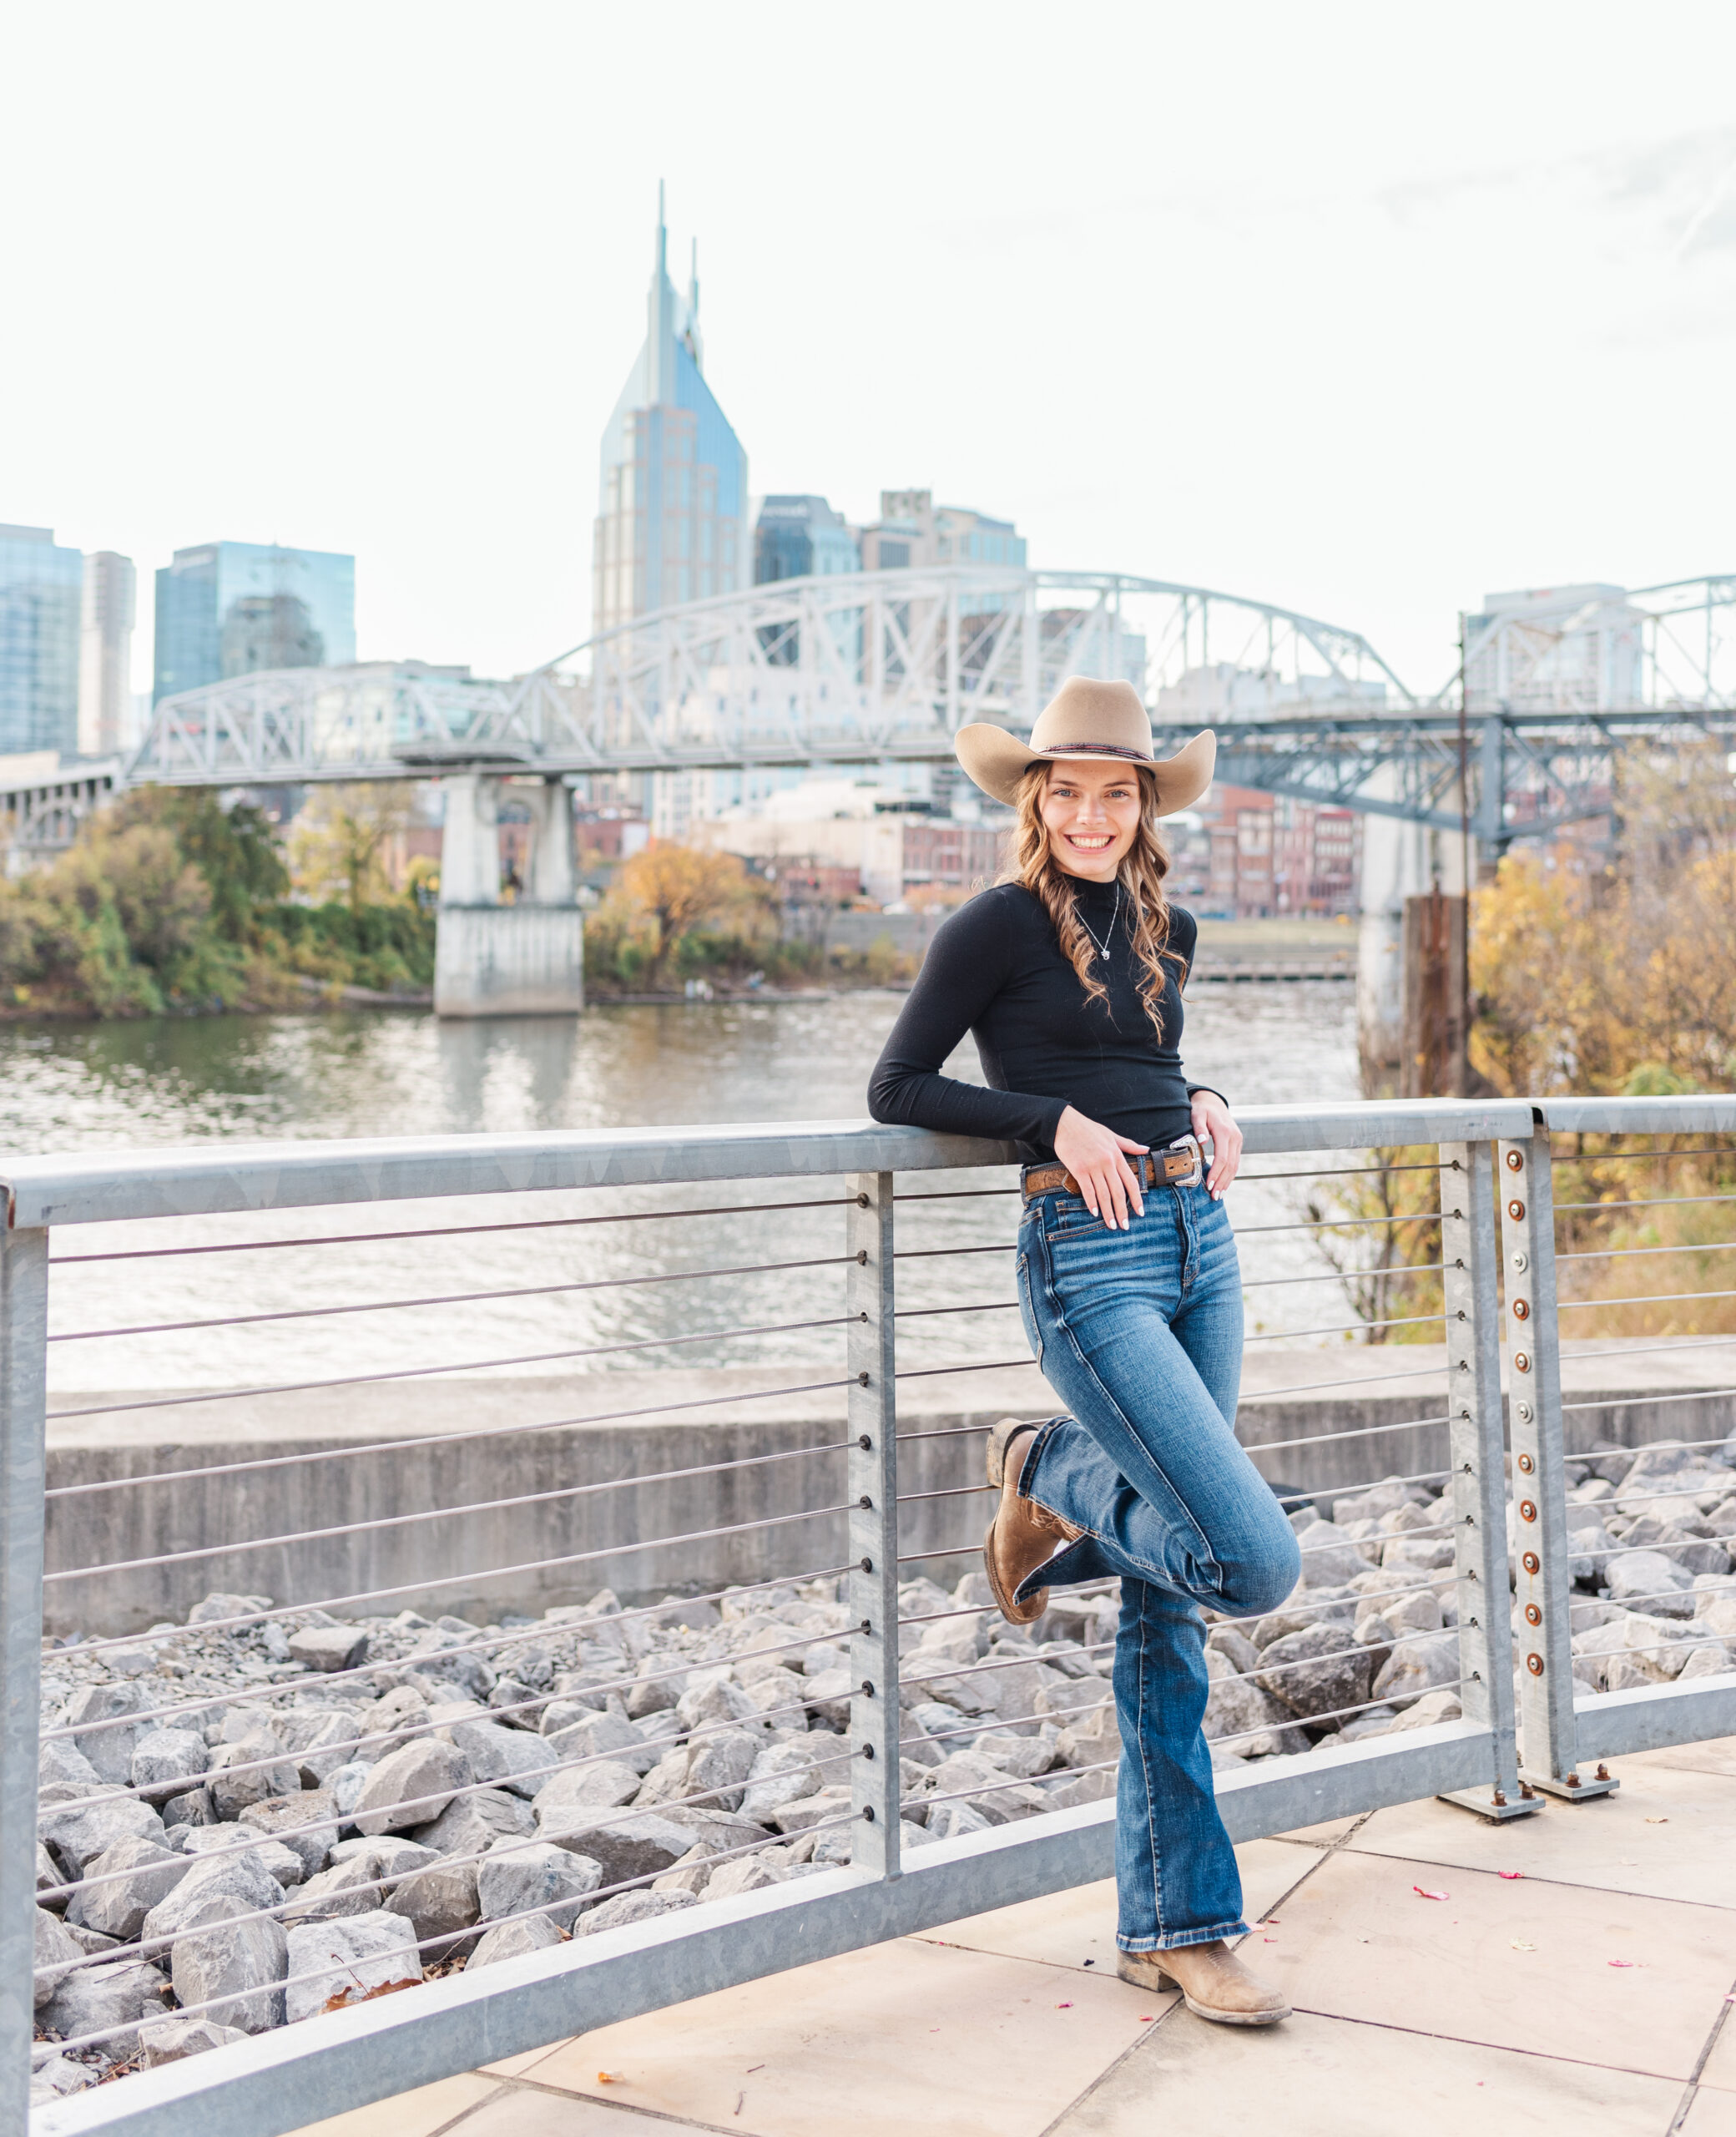 High school senior wearing jeans and a cowboy hat in standing in front of the Nashville skyline in Nashville, TN